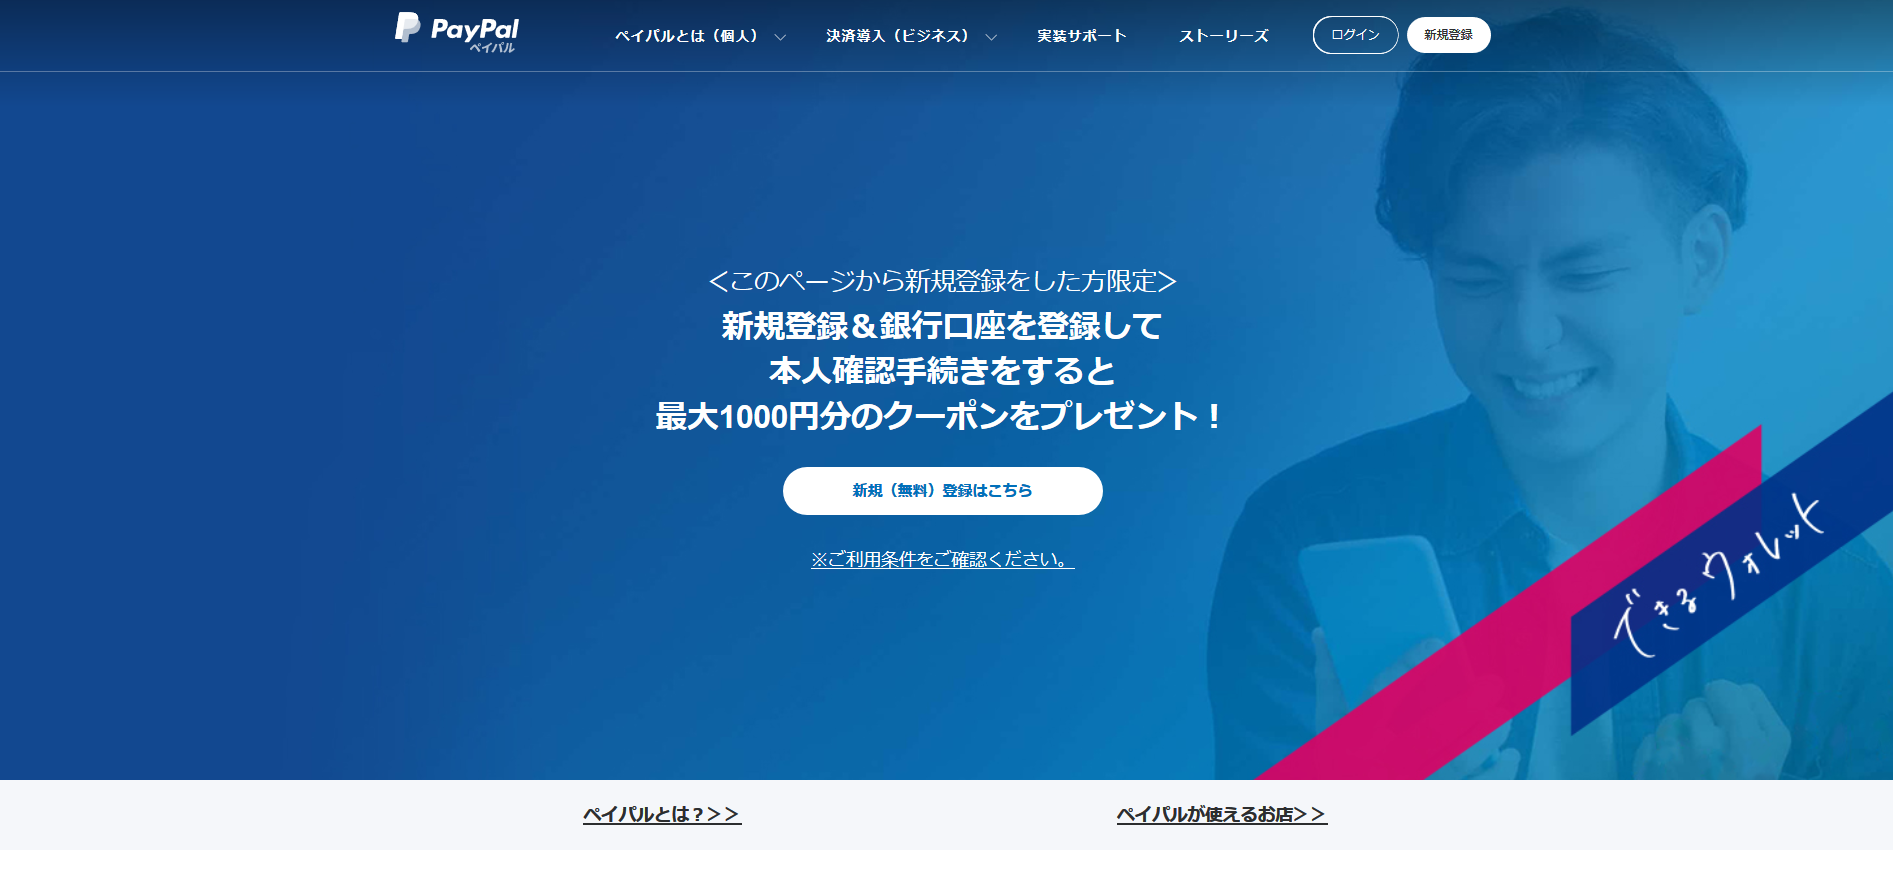 PayPal:最大1000円分のクーポン！新規登録キャンペーン